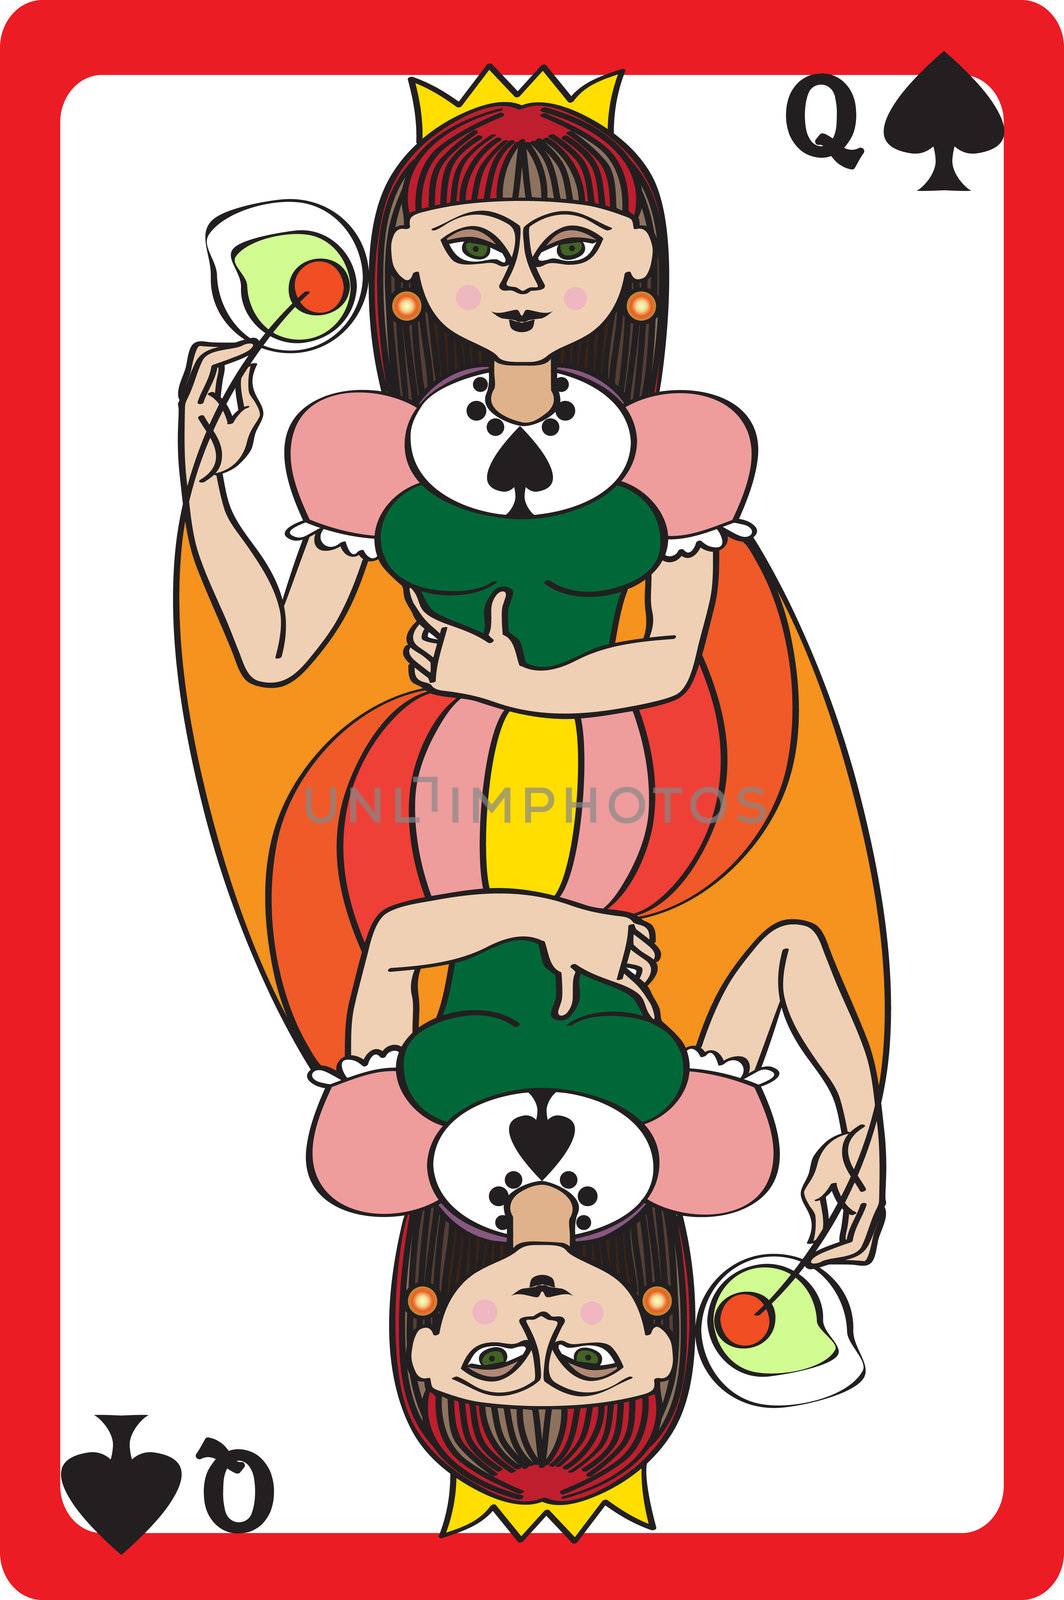 Scale hand drawn illustration of a playing card representing the queen of spades, an element of a deck